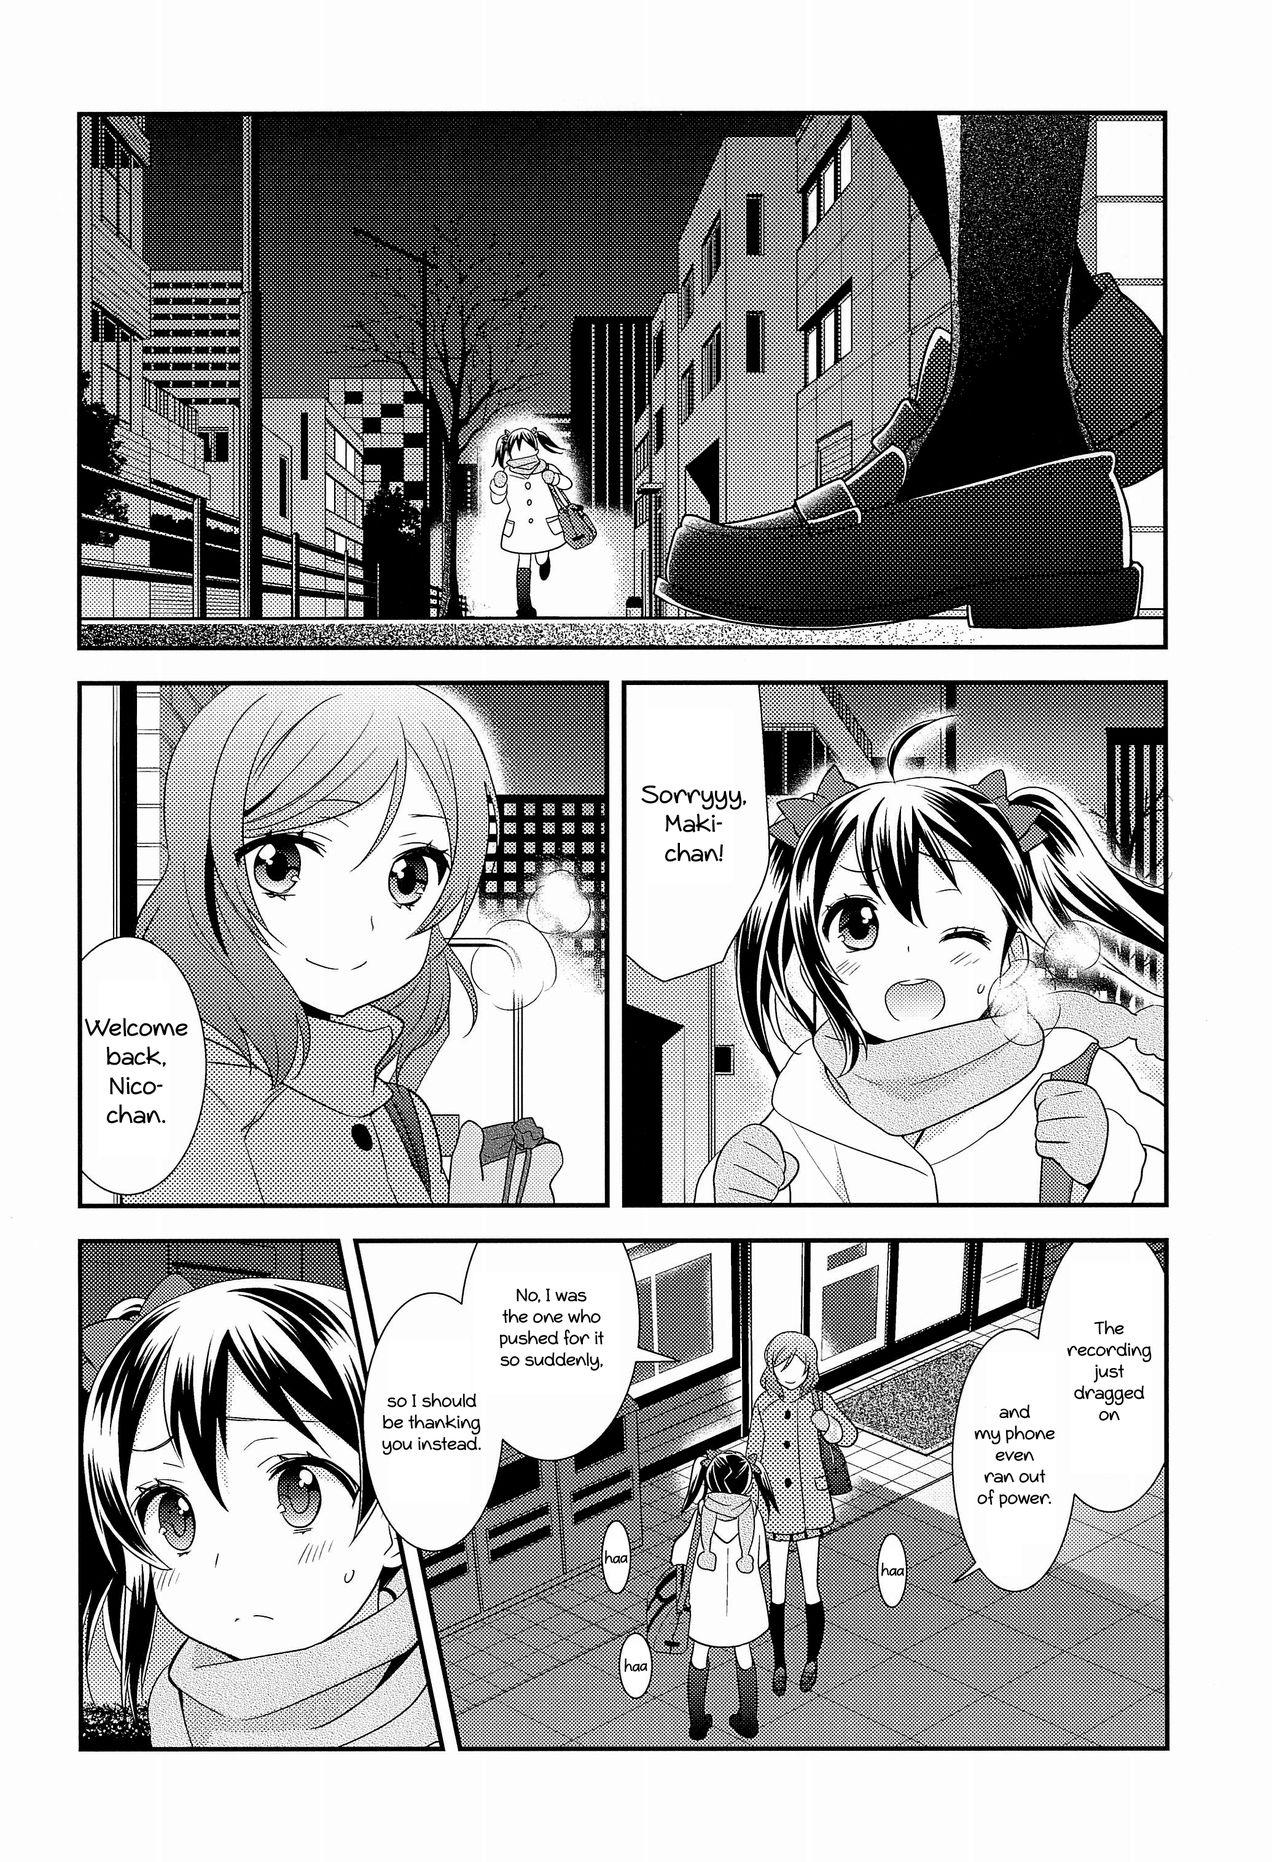 Atm BABY I LOVE YOU - Love live Rough Sex Porn - Page 4